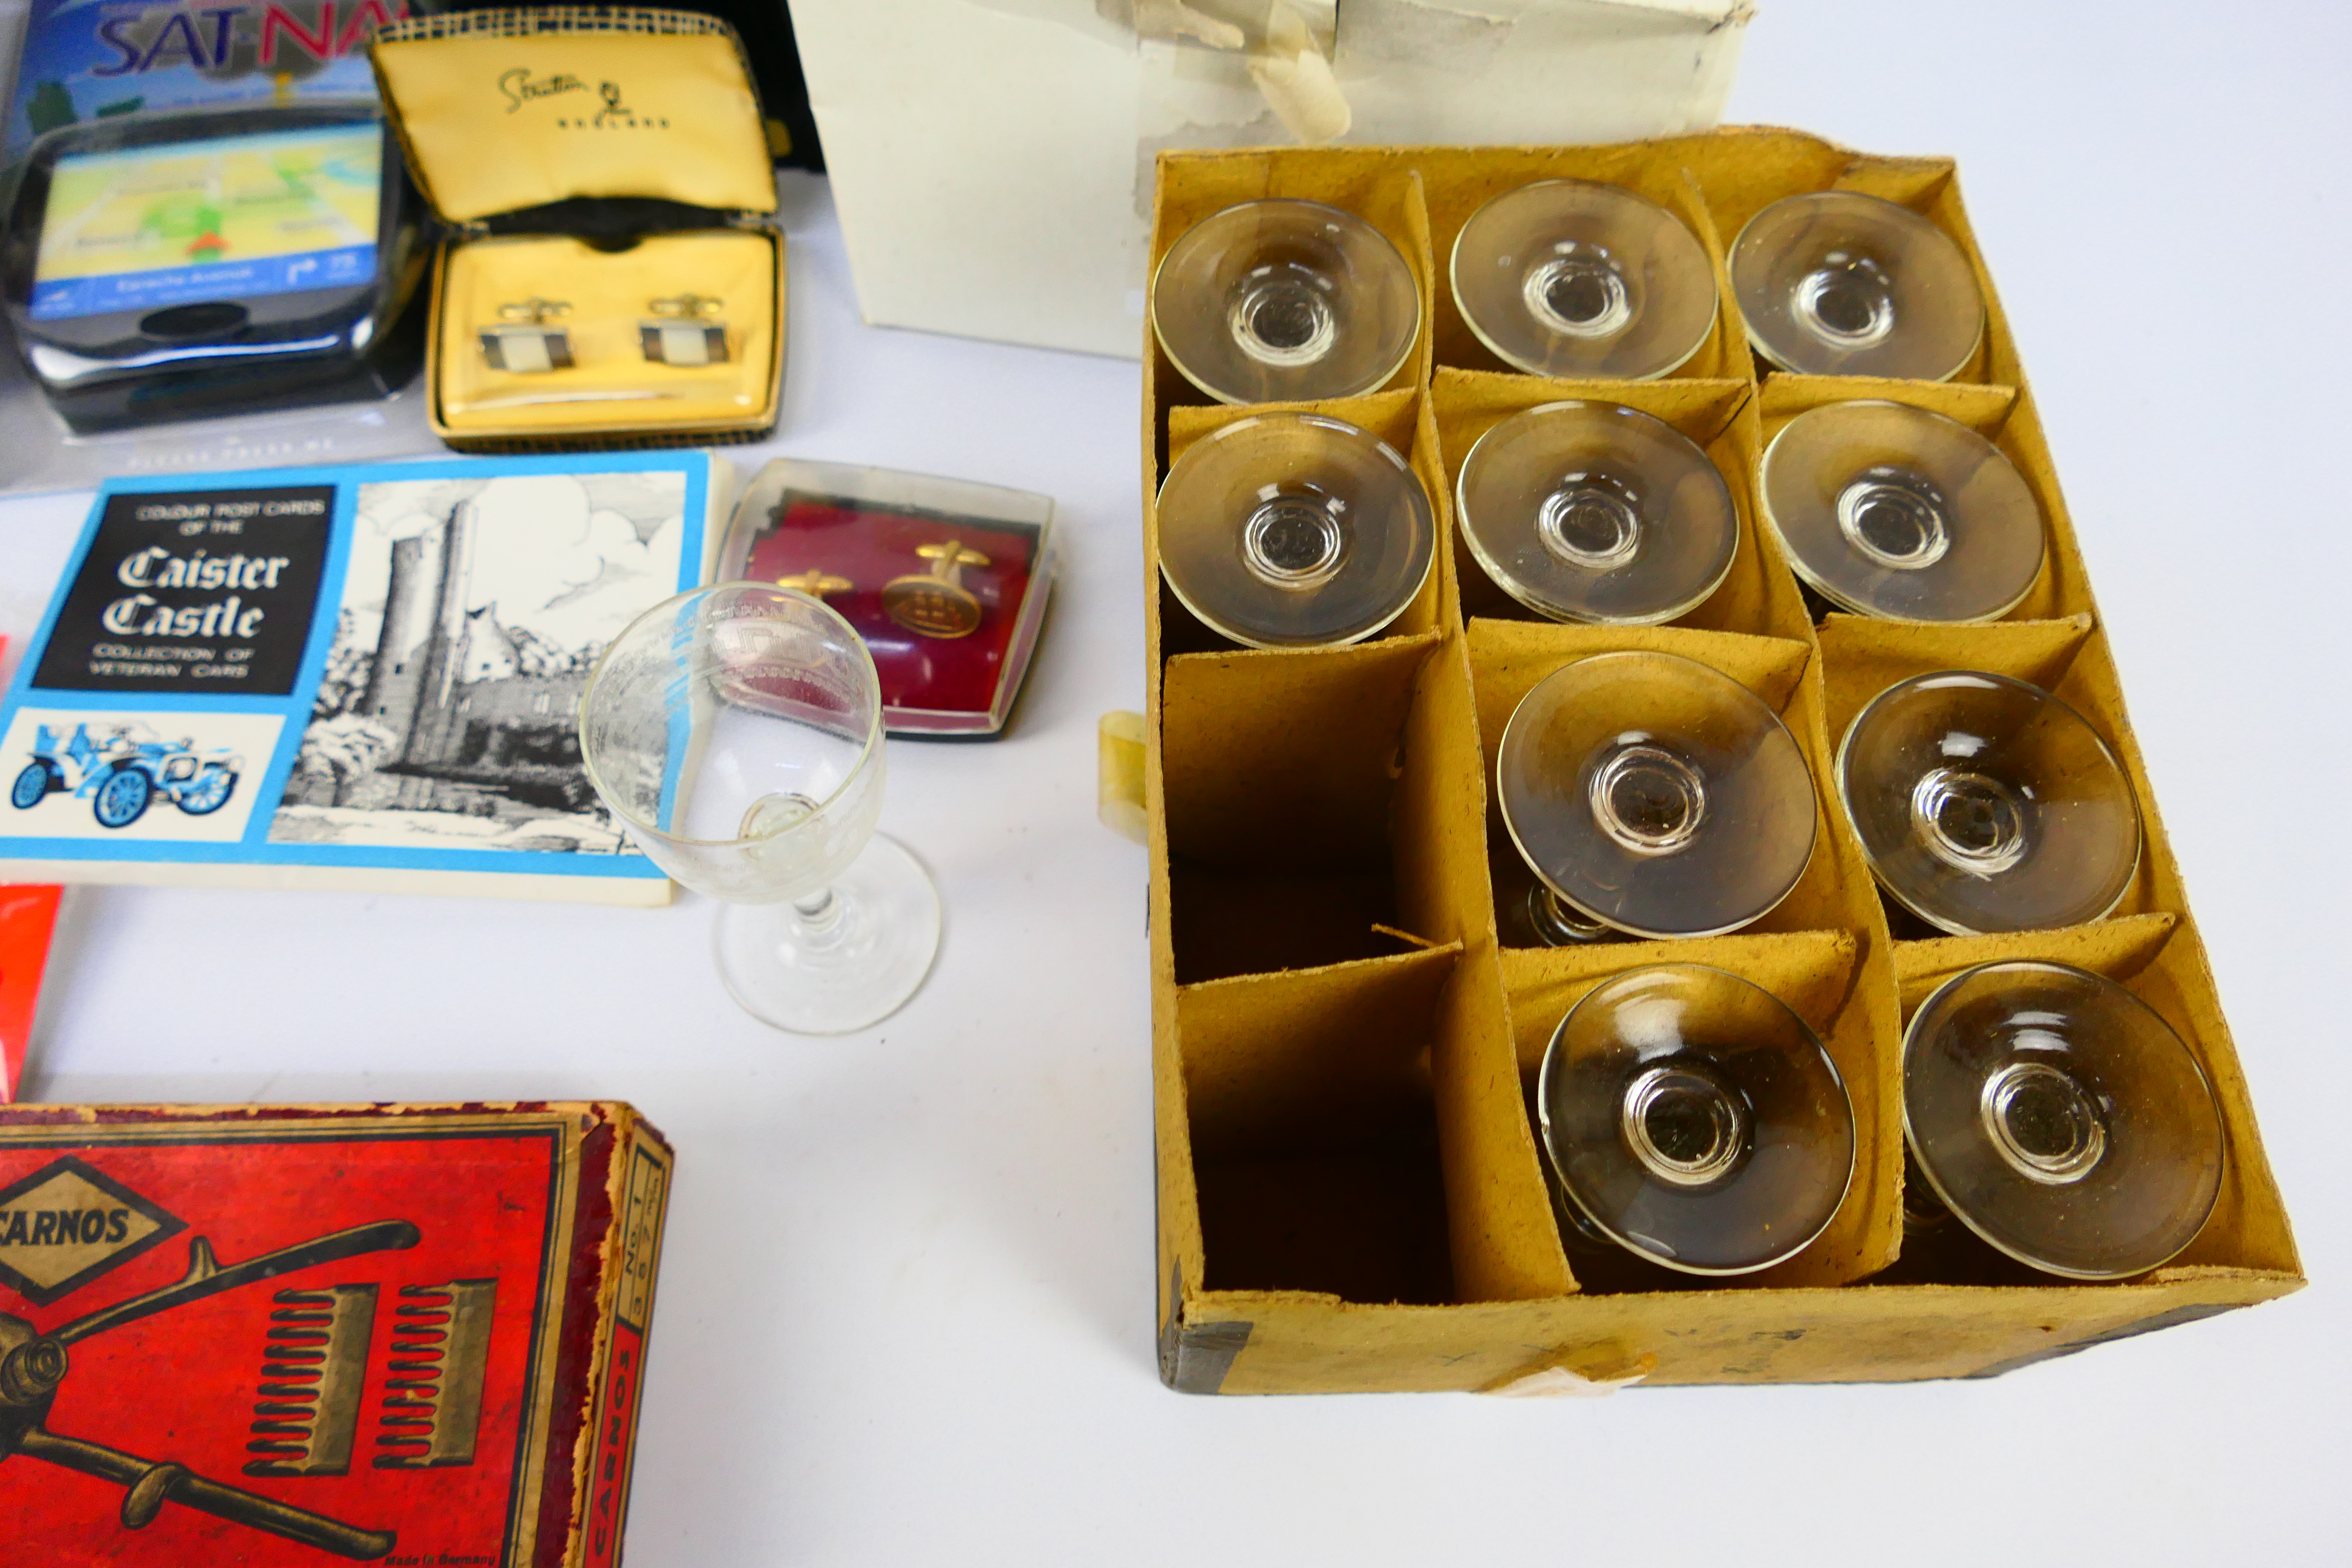 Lot to include glassware, vintage hair clippers, 8mm film reels, scales, cufflinks and other. - Image 7 of 8